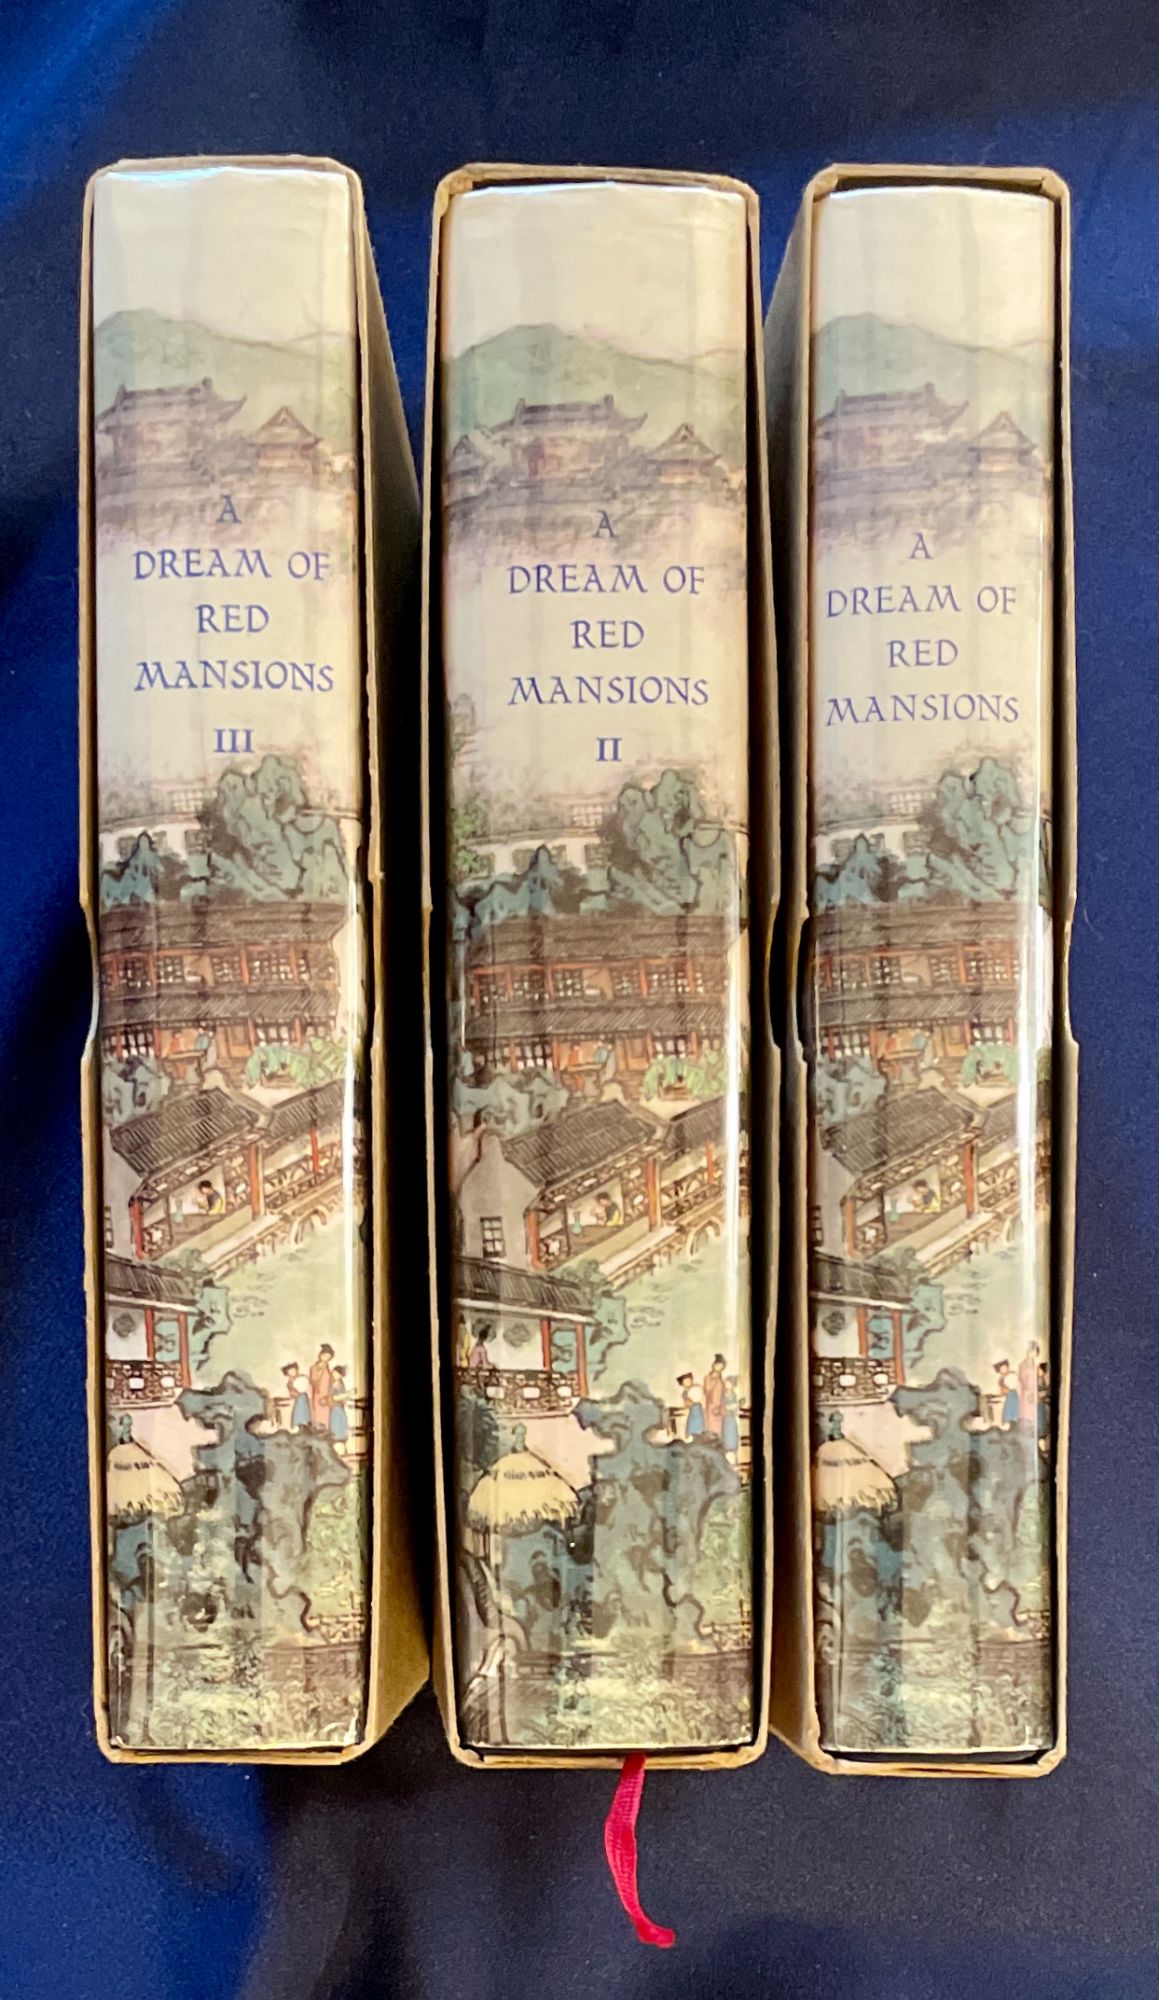 Afsnit forværres Blodig A DREAM OF RED MANSIONS; Volumes I - III / Tsao Hsueh-Chin and Kao Ngo  Translated by Yang Hsien-yi and Gladys Yang | Tsao Hsueh-Chin, Kao Ngo |  First Editions Text in